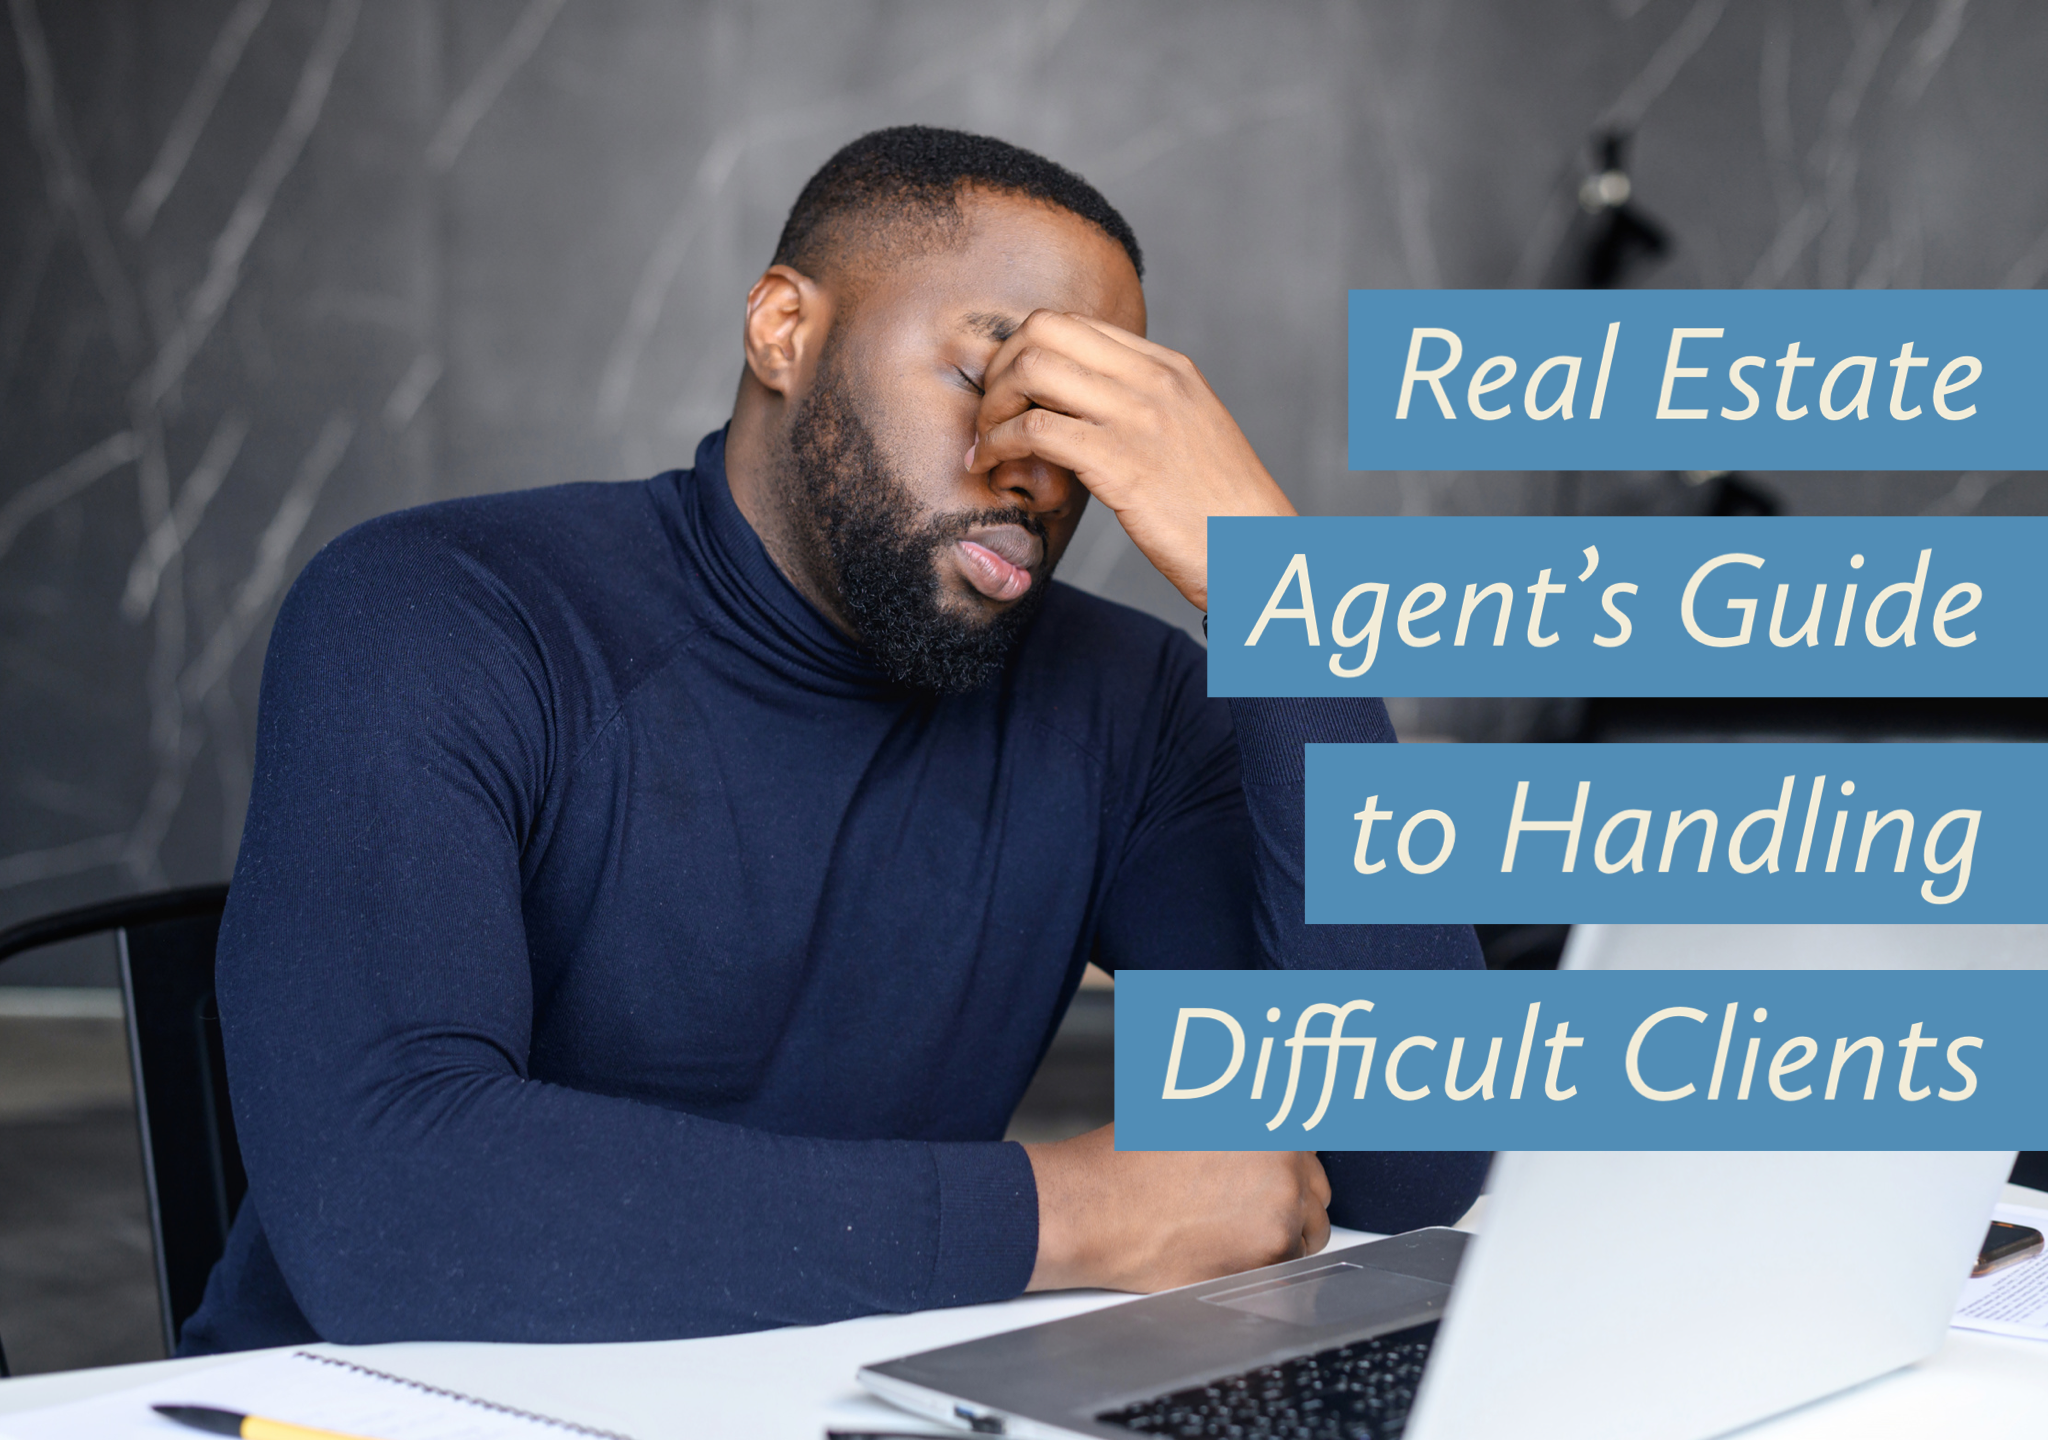 A frustrated real estate client